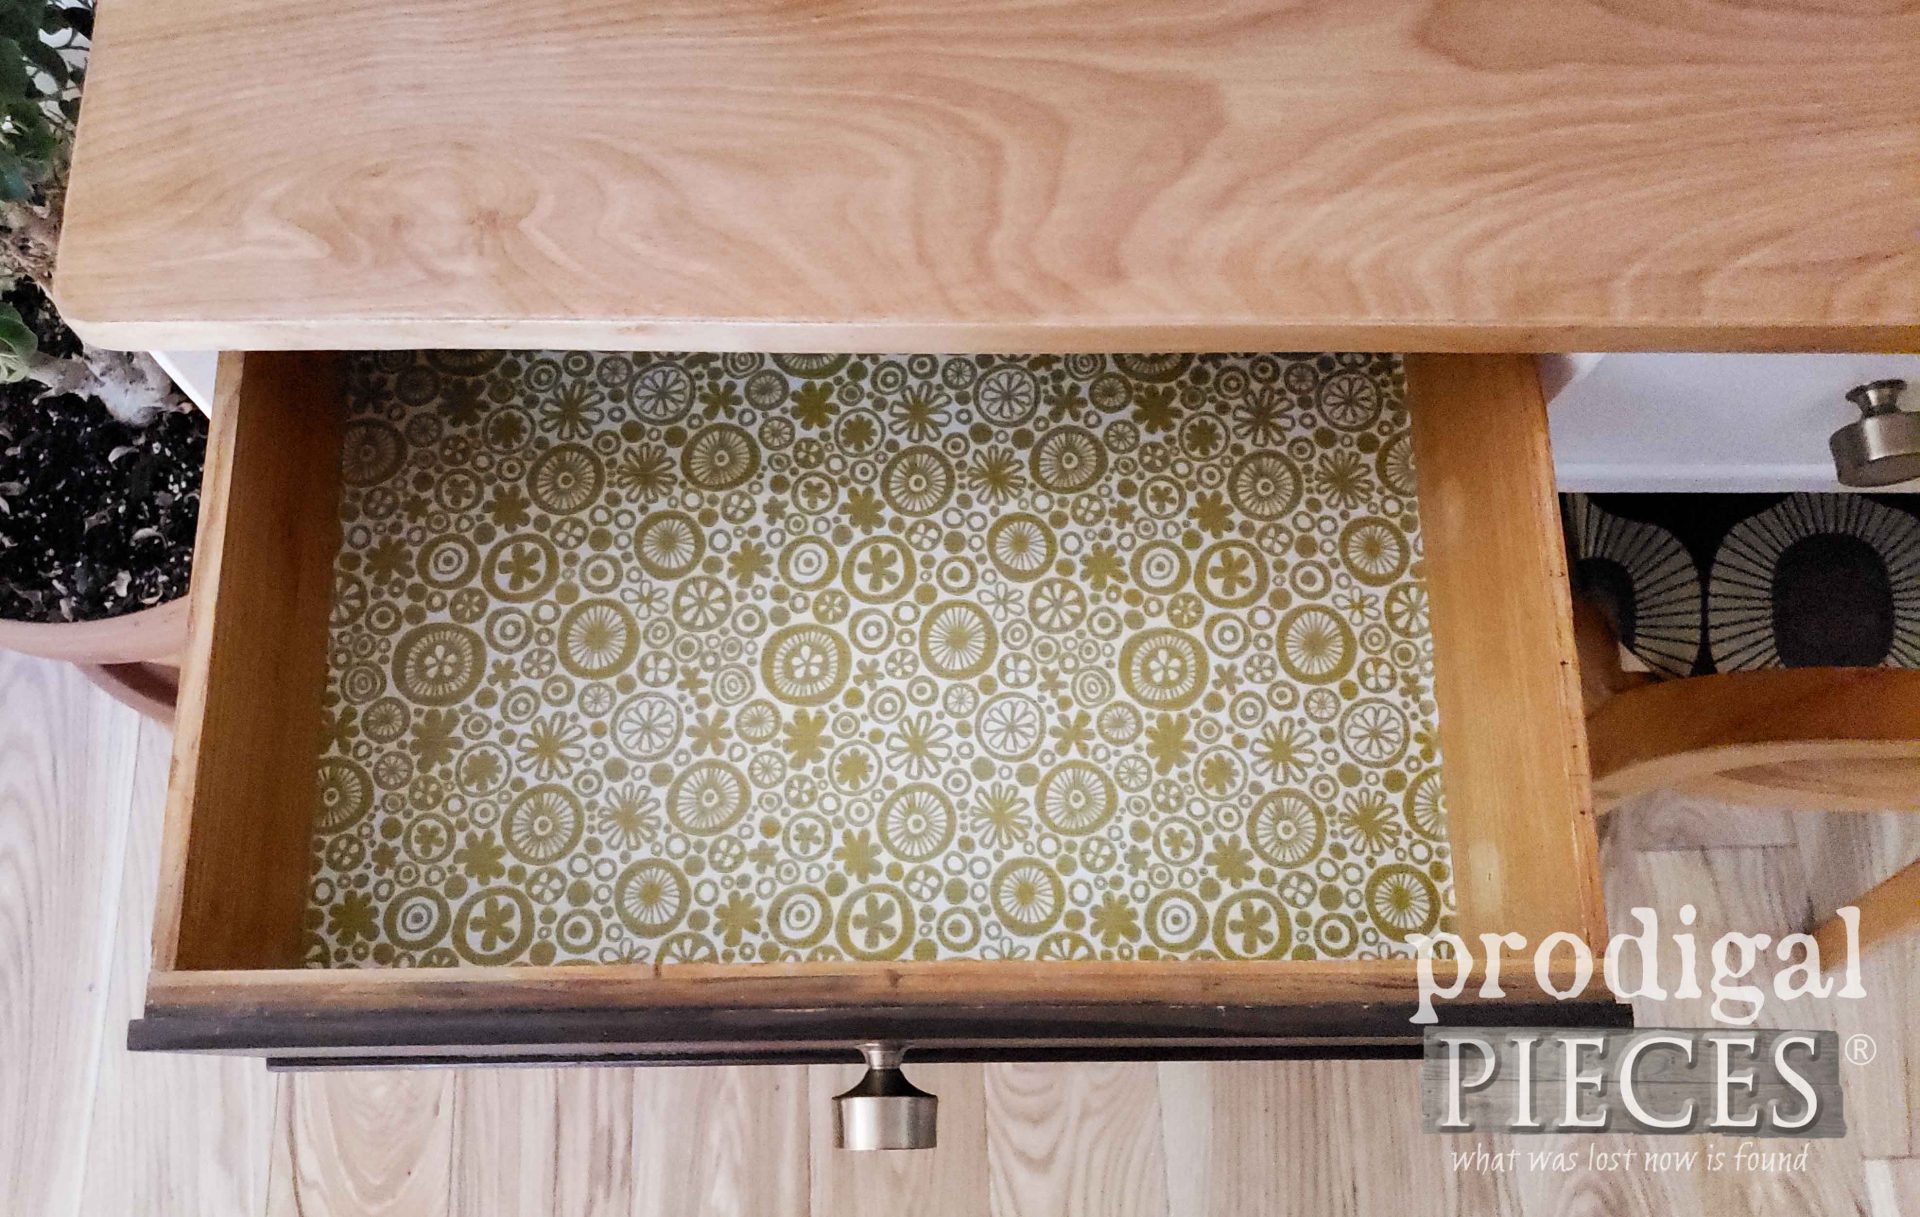 Mid Century Modern Desk drawer lined with vintage liner by Prodigal Pieces | prodigalpieces.com #prodigalpieces #furniture #home #diy #homedecor #midcentury